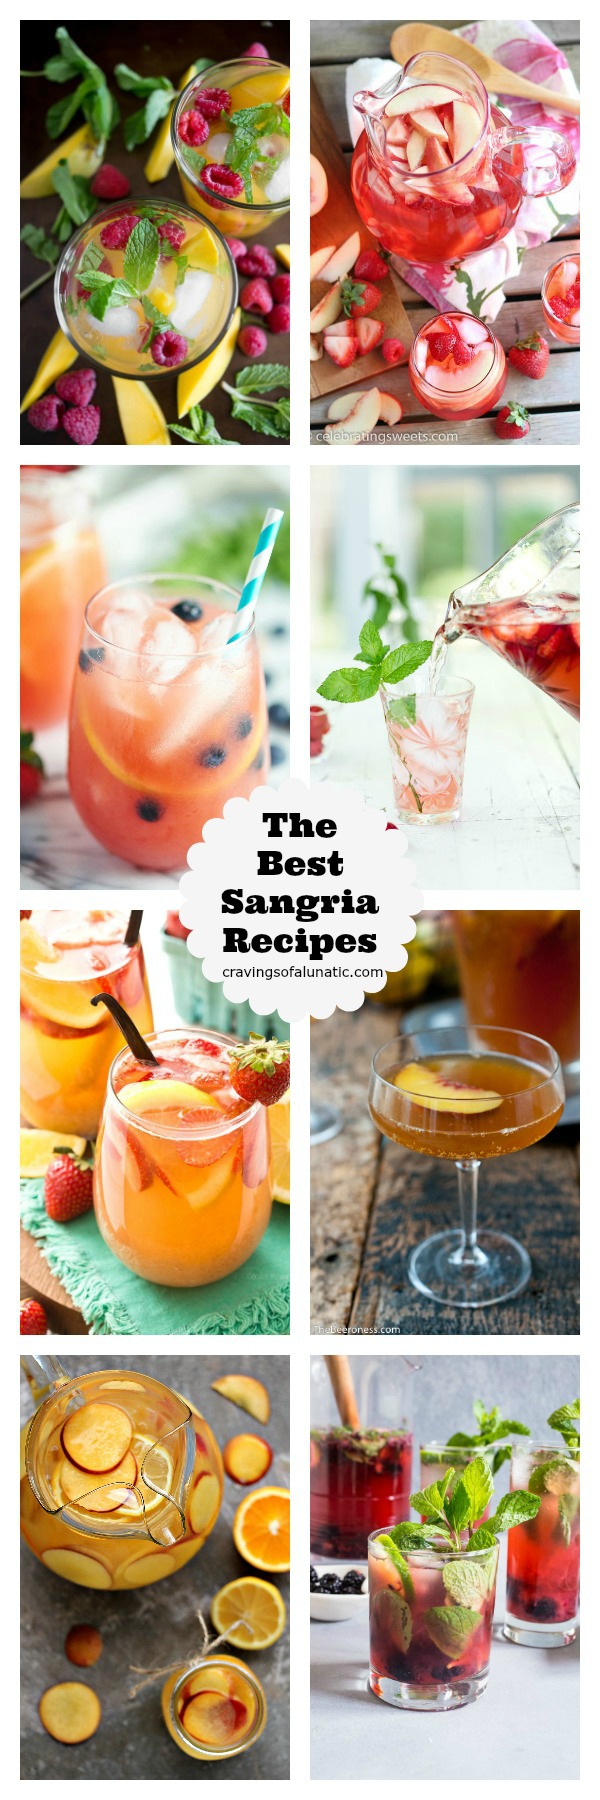 The Best Sangria Recipes from cravingsofalunatic.com- Celebrate summer in epic style with The Best Sangria Recipes! Sangria is so easy to make and super versatile. Whip up a batch today!